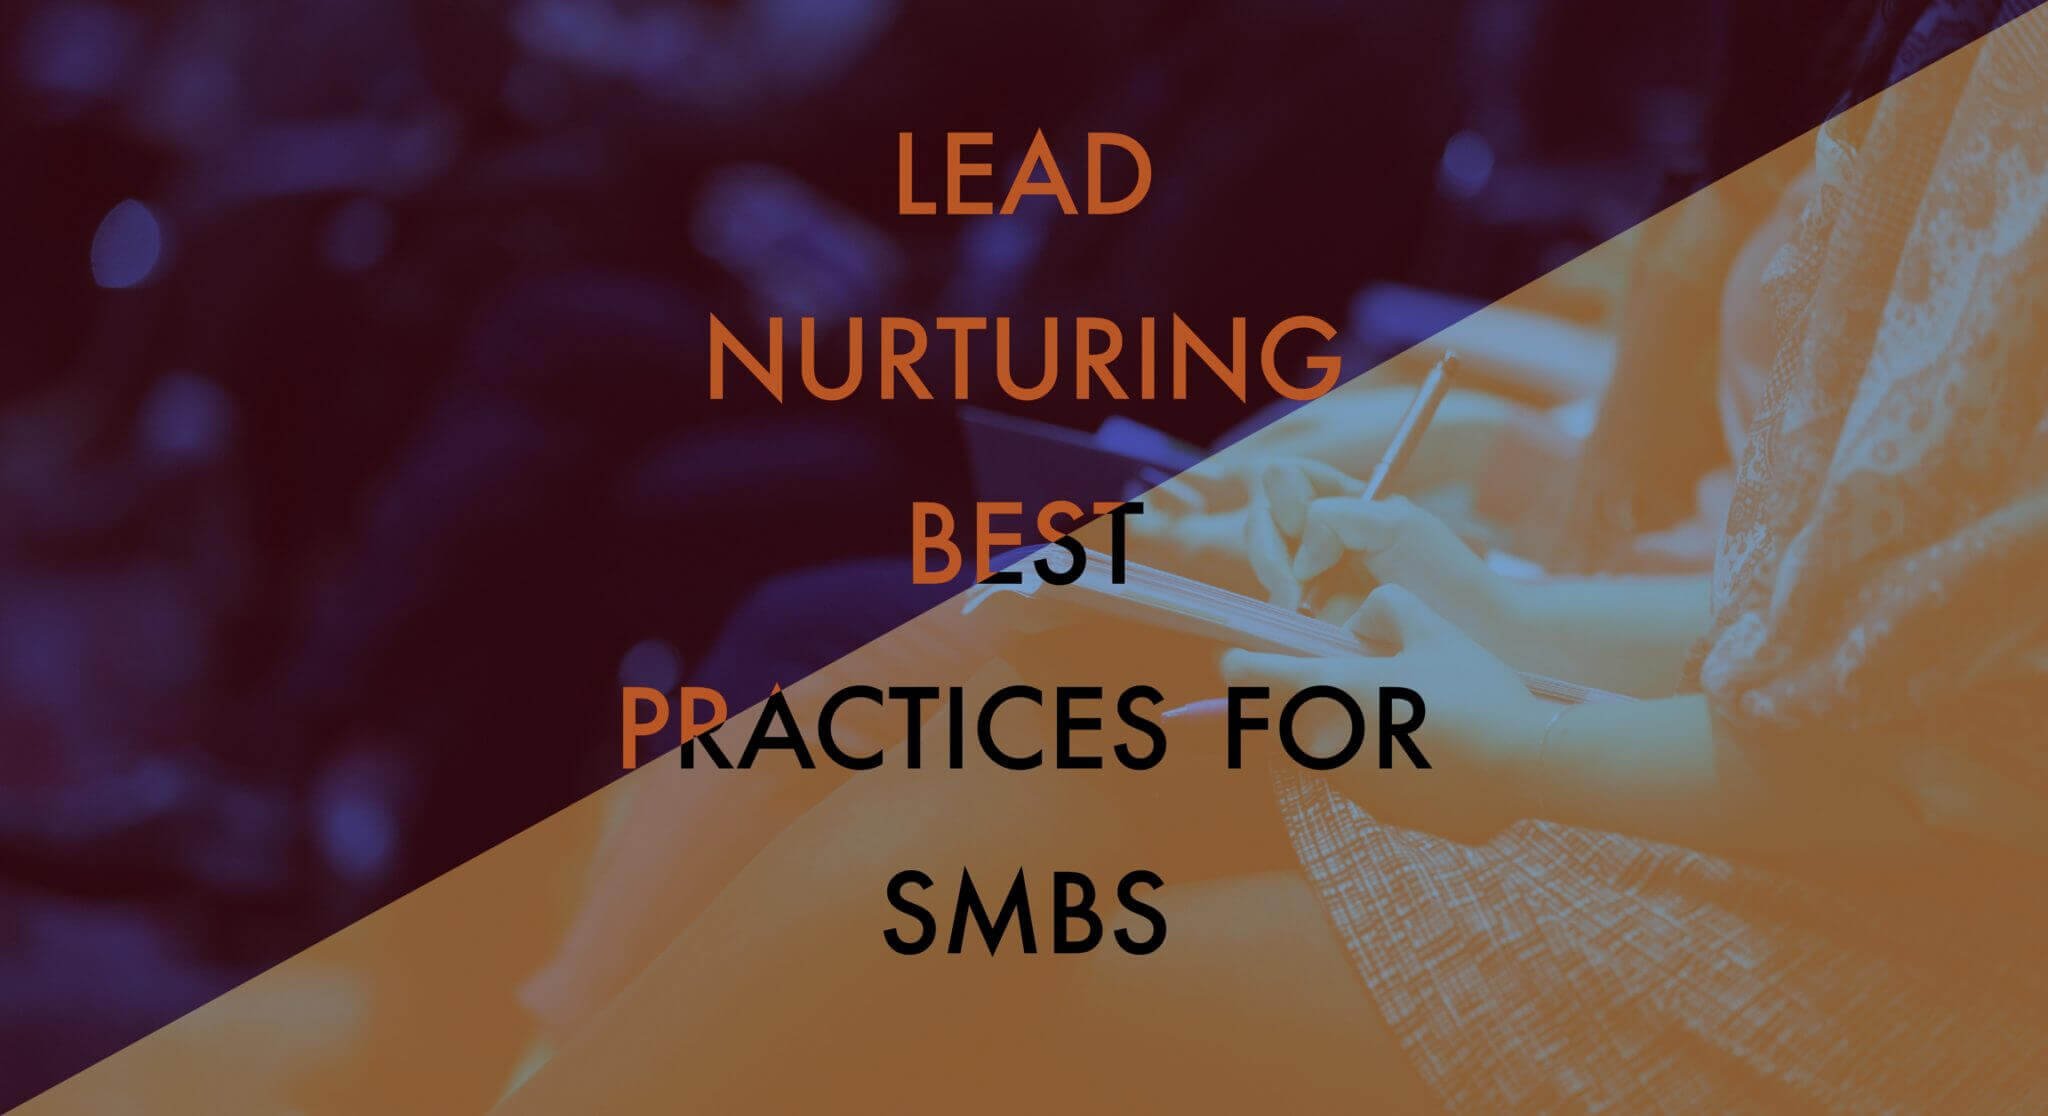 Lead Nurturing Best Practices for SMBs